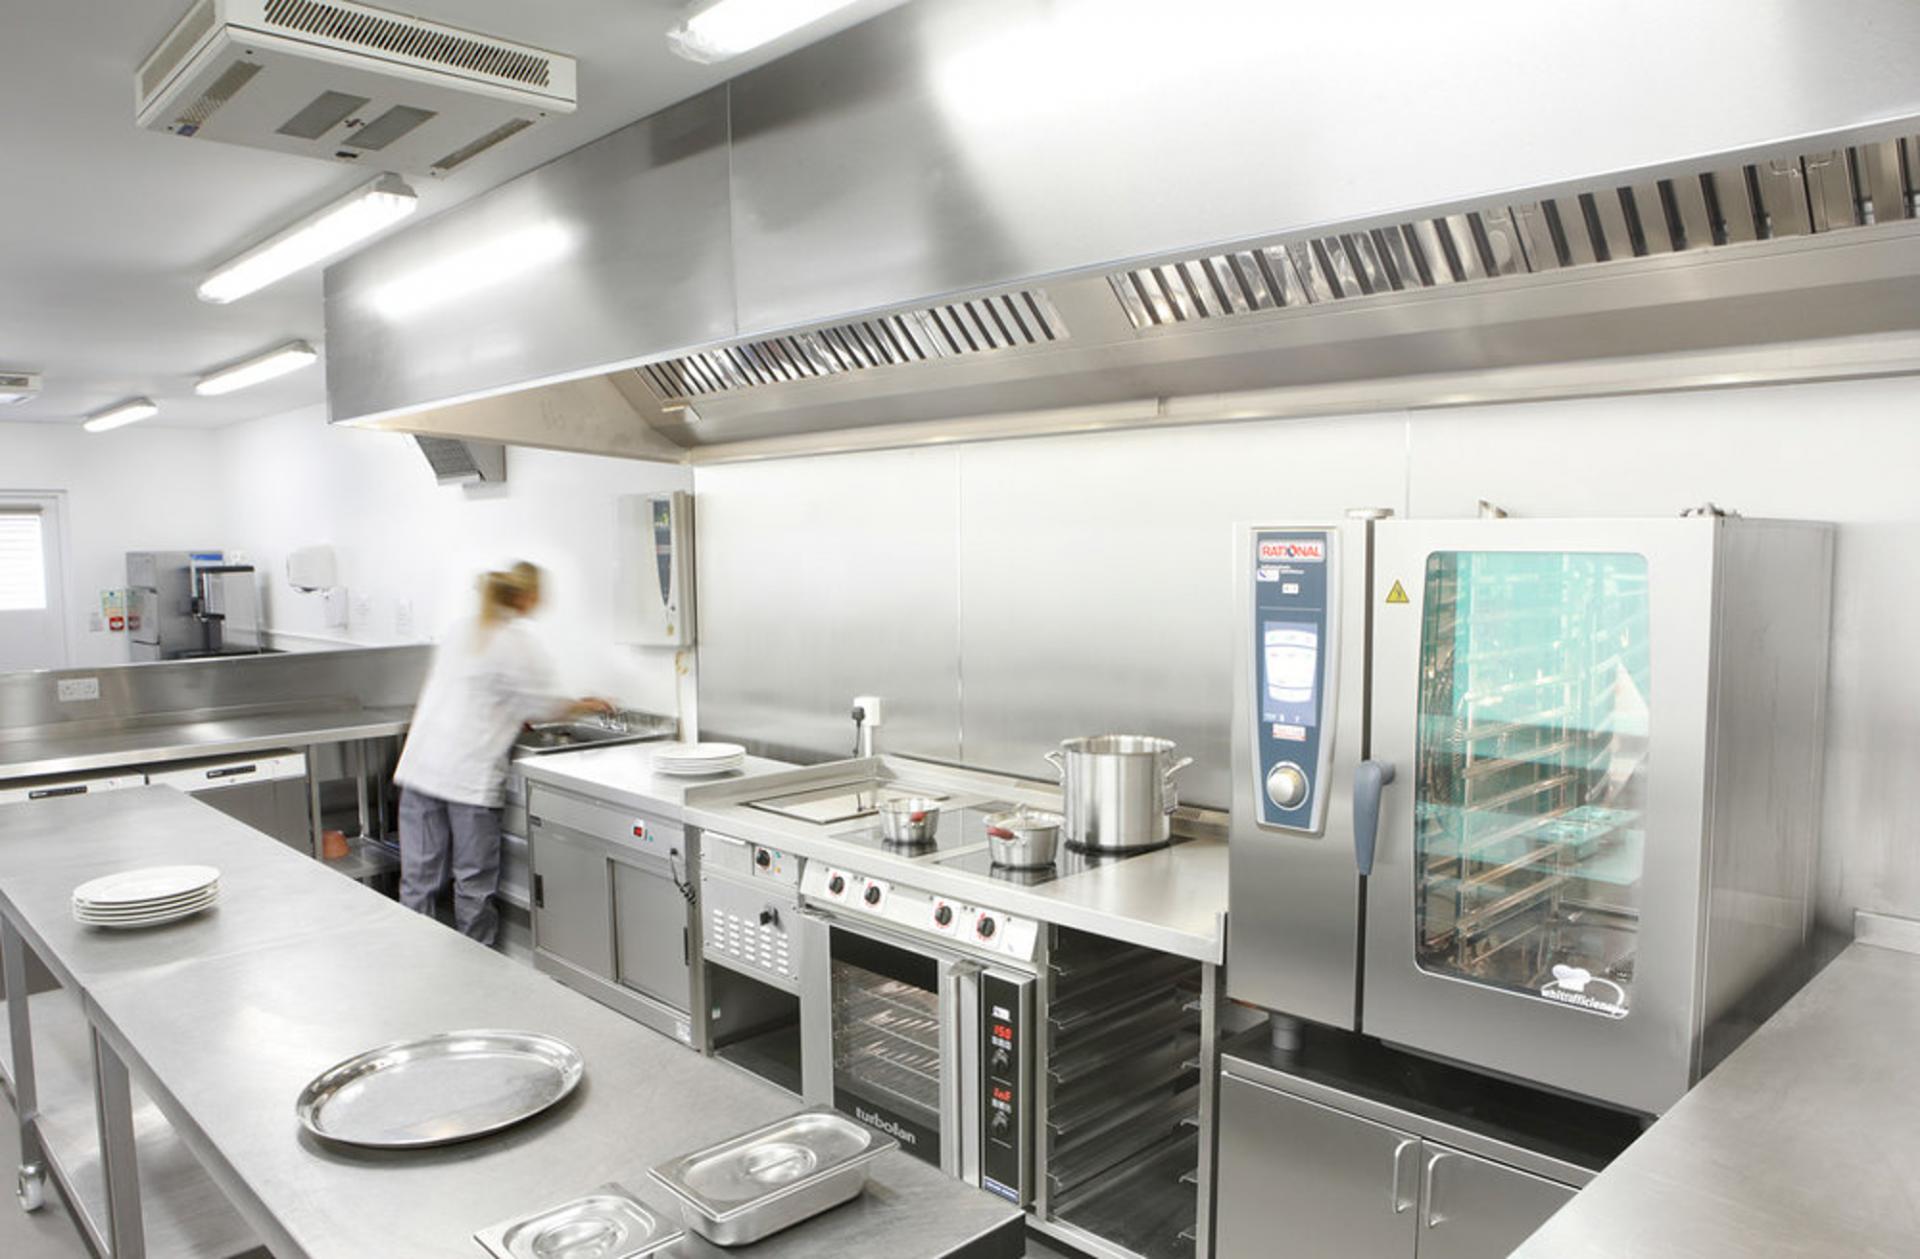 PE backing drives major M&A deal in UK catering equipment sector 